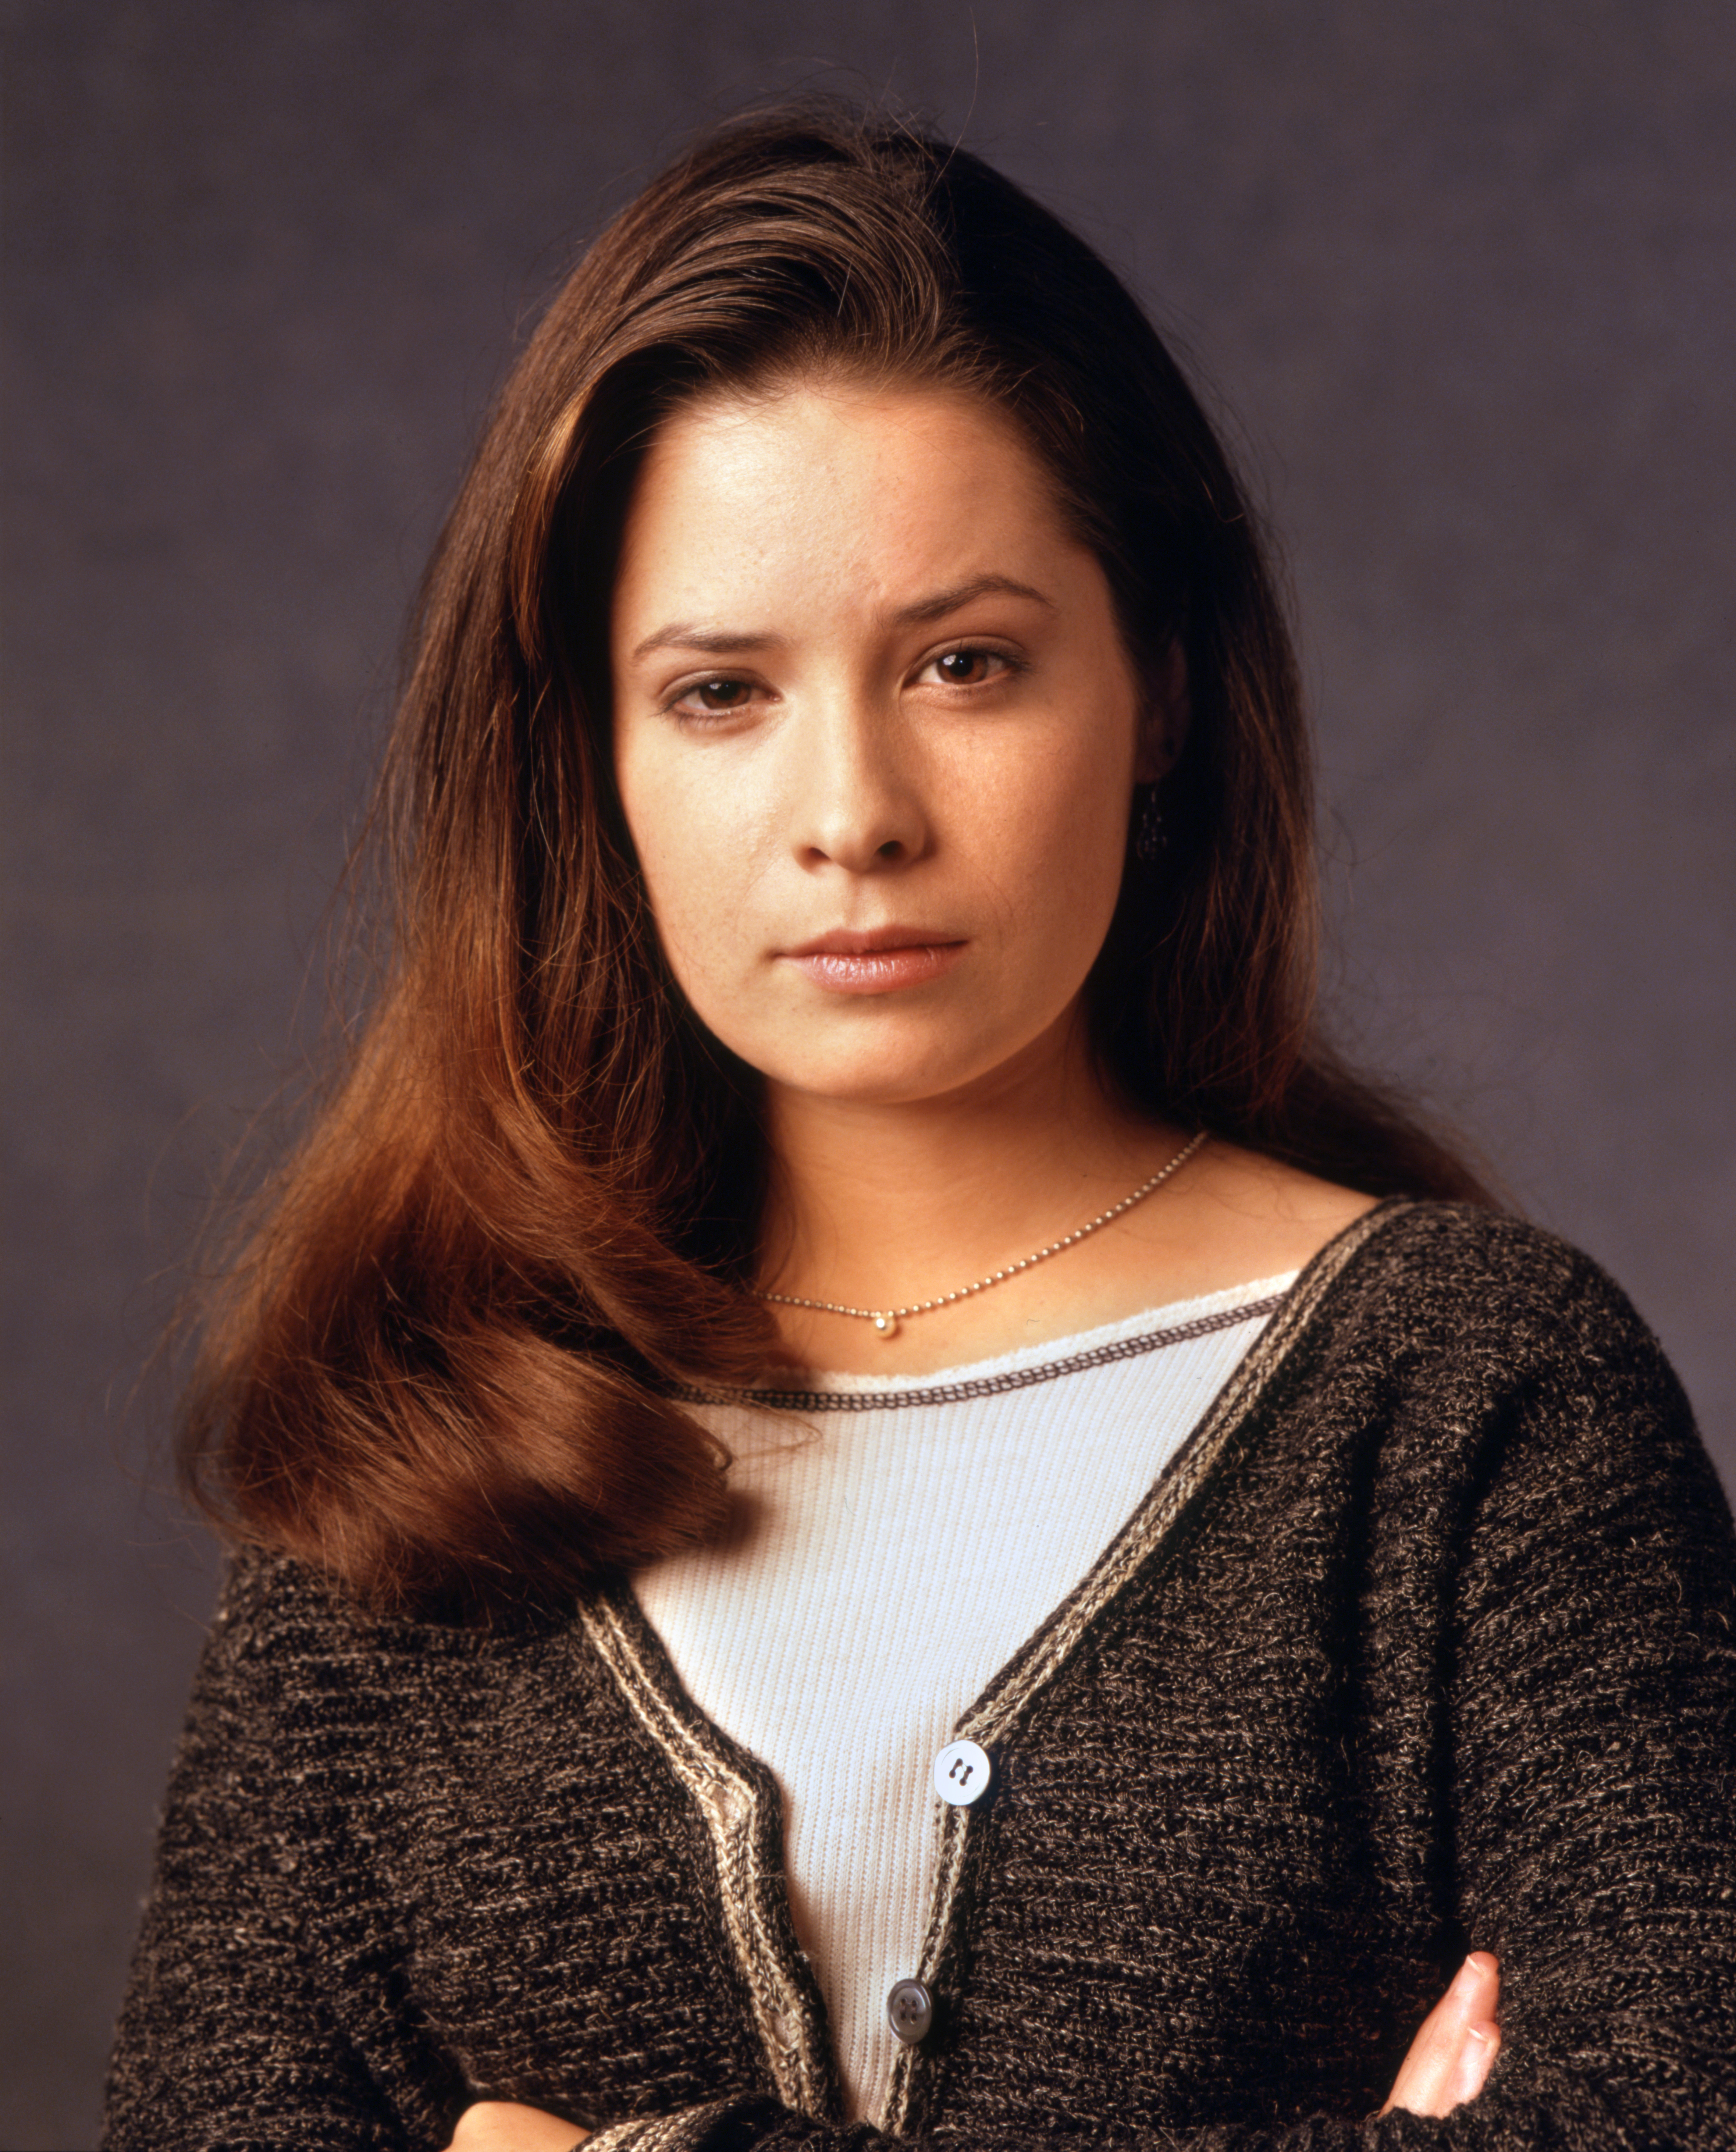 Holly Marie Combs in her role as Kimberly Brock in "Picket Fences" on August 16, 1995 | Source: Getty Images